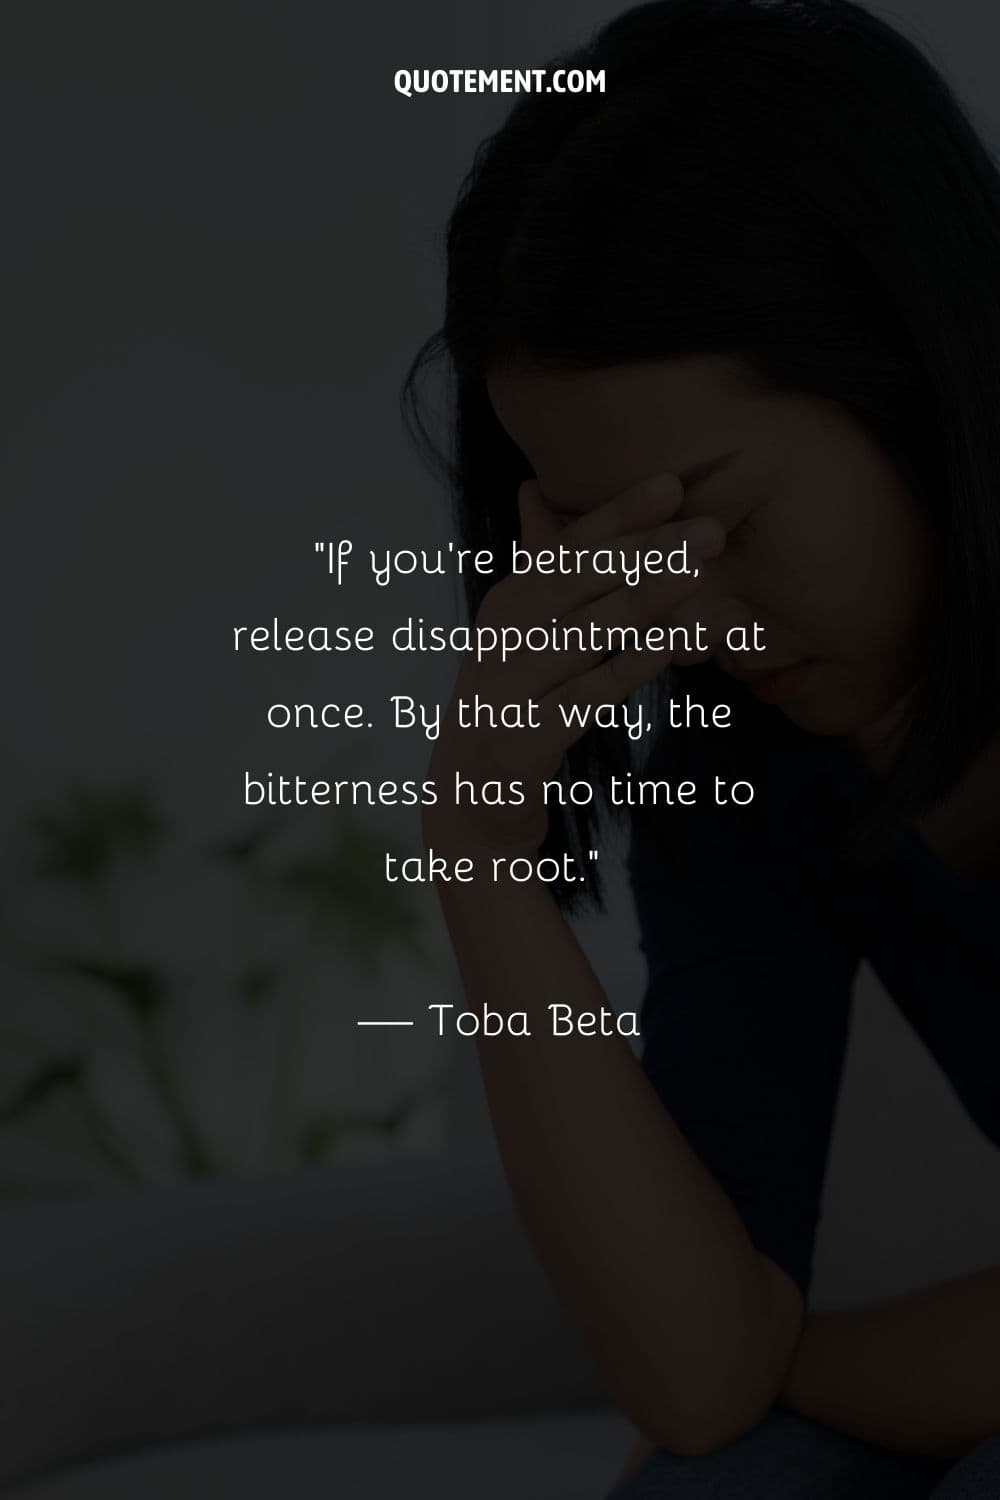 If you're betrayed, release disappointment at once. By that way, the bitterness has no time to take root